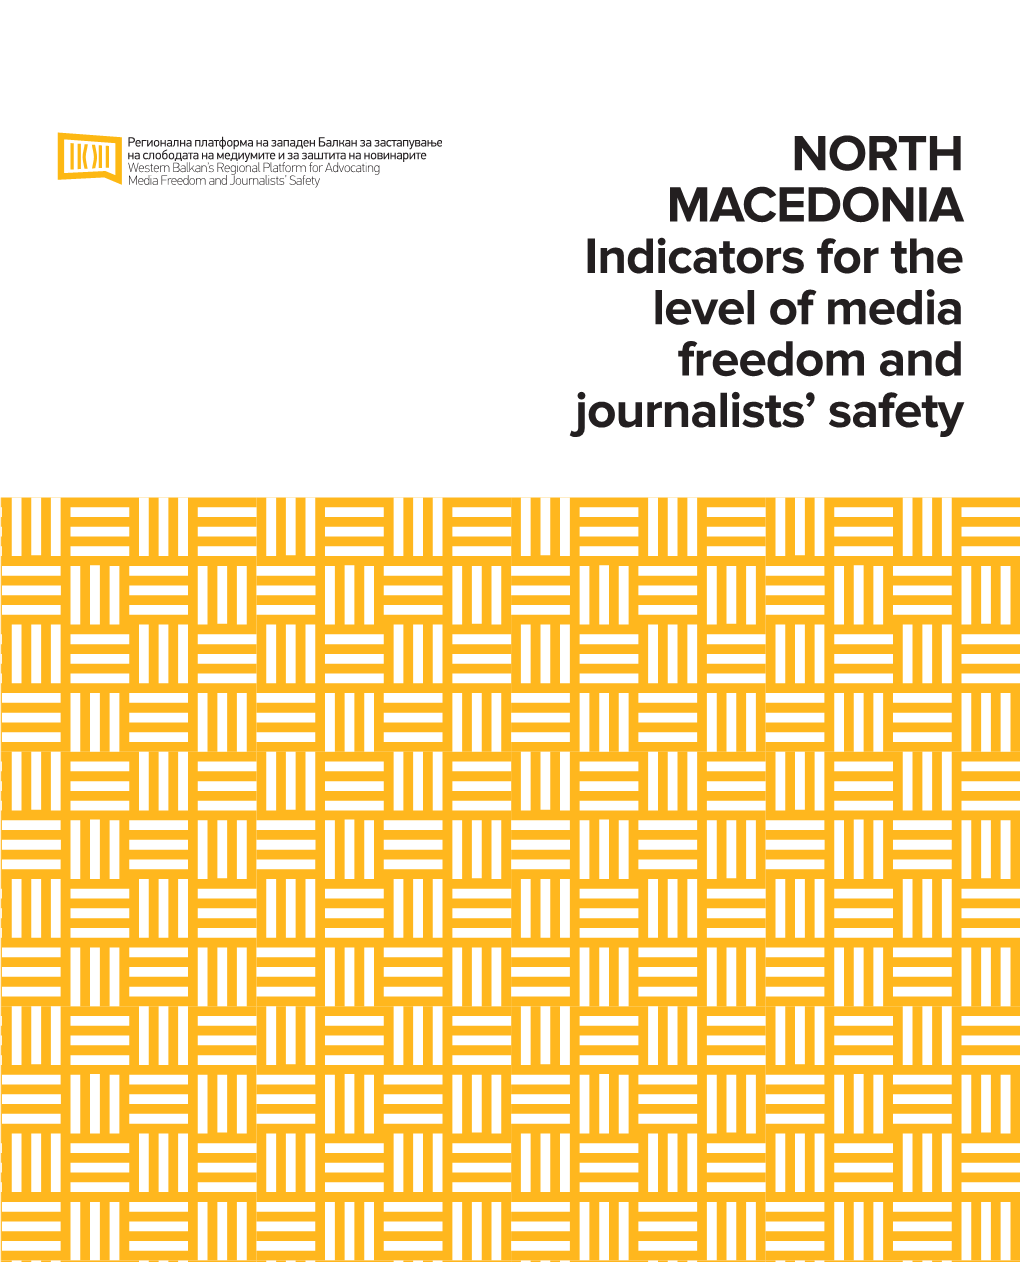 NORTH MACEDONIA Indicators for the Level of Media Freedom and Journalists’ Safety